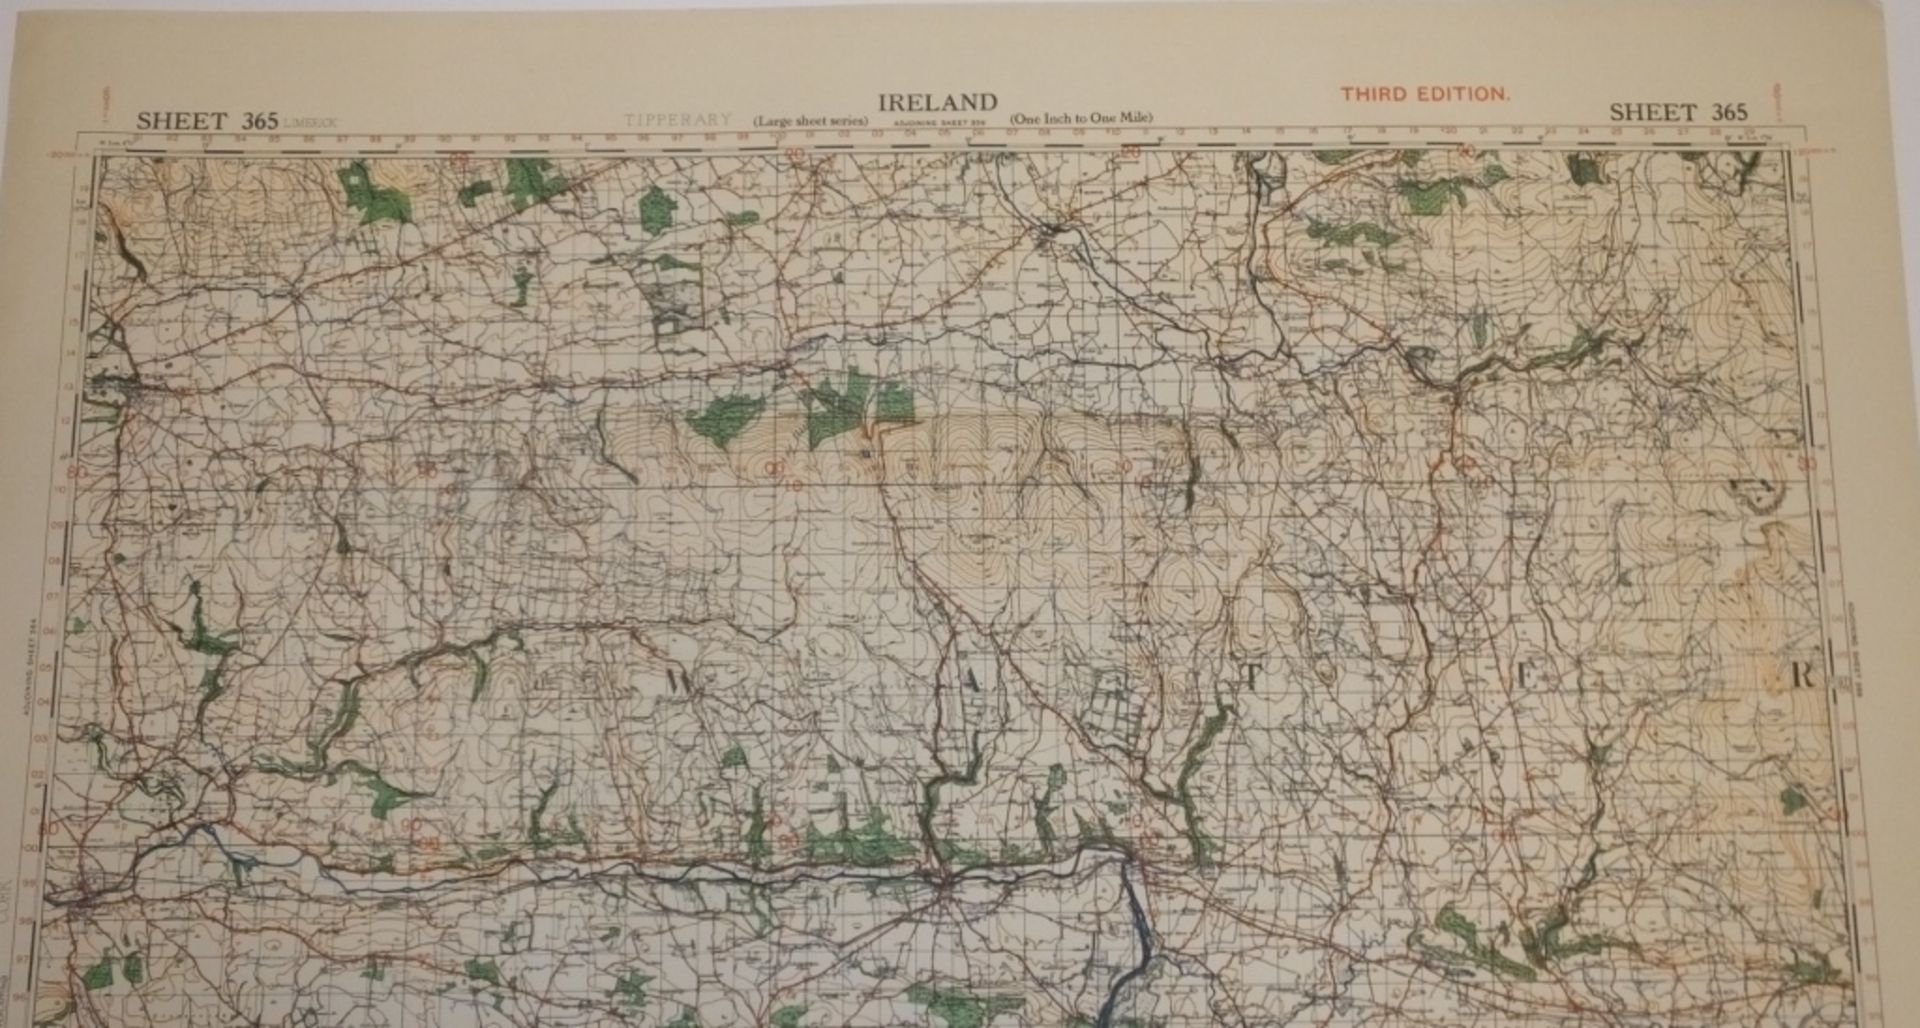 28x IRELAND MAP 1INCH 1MILE 1942 3RD EDITION 4136 GSGS SHEET 365 WATERFORD COUNTY - Image 2 of 3